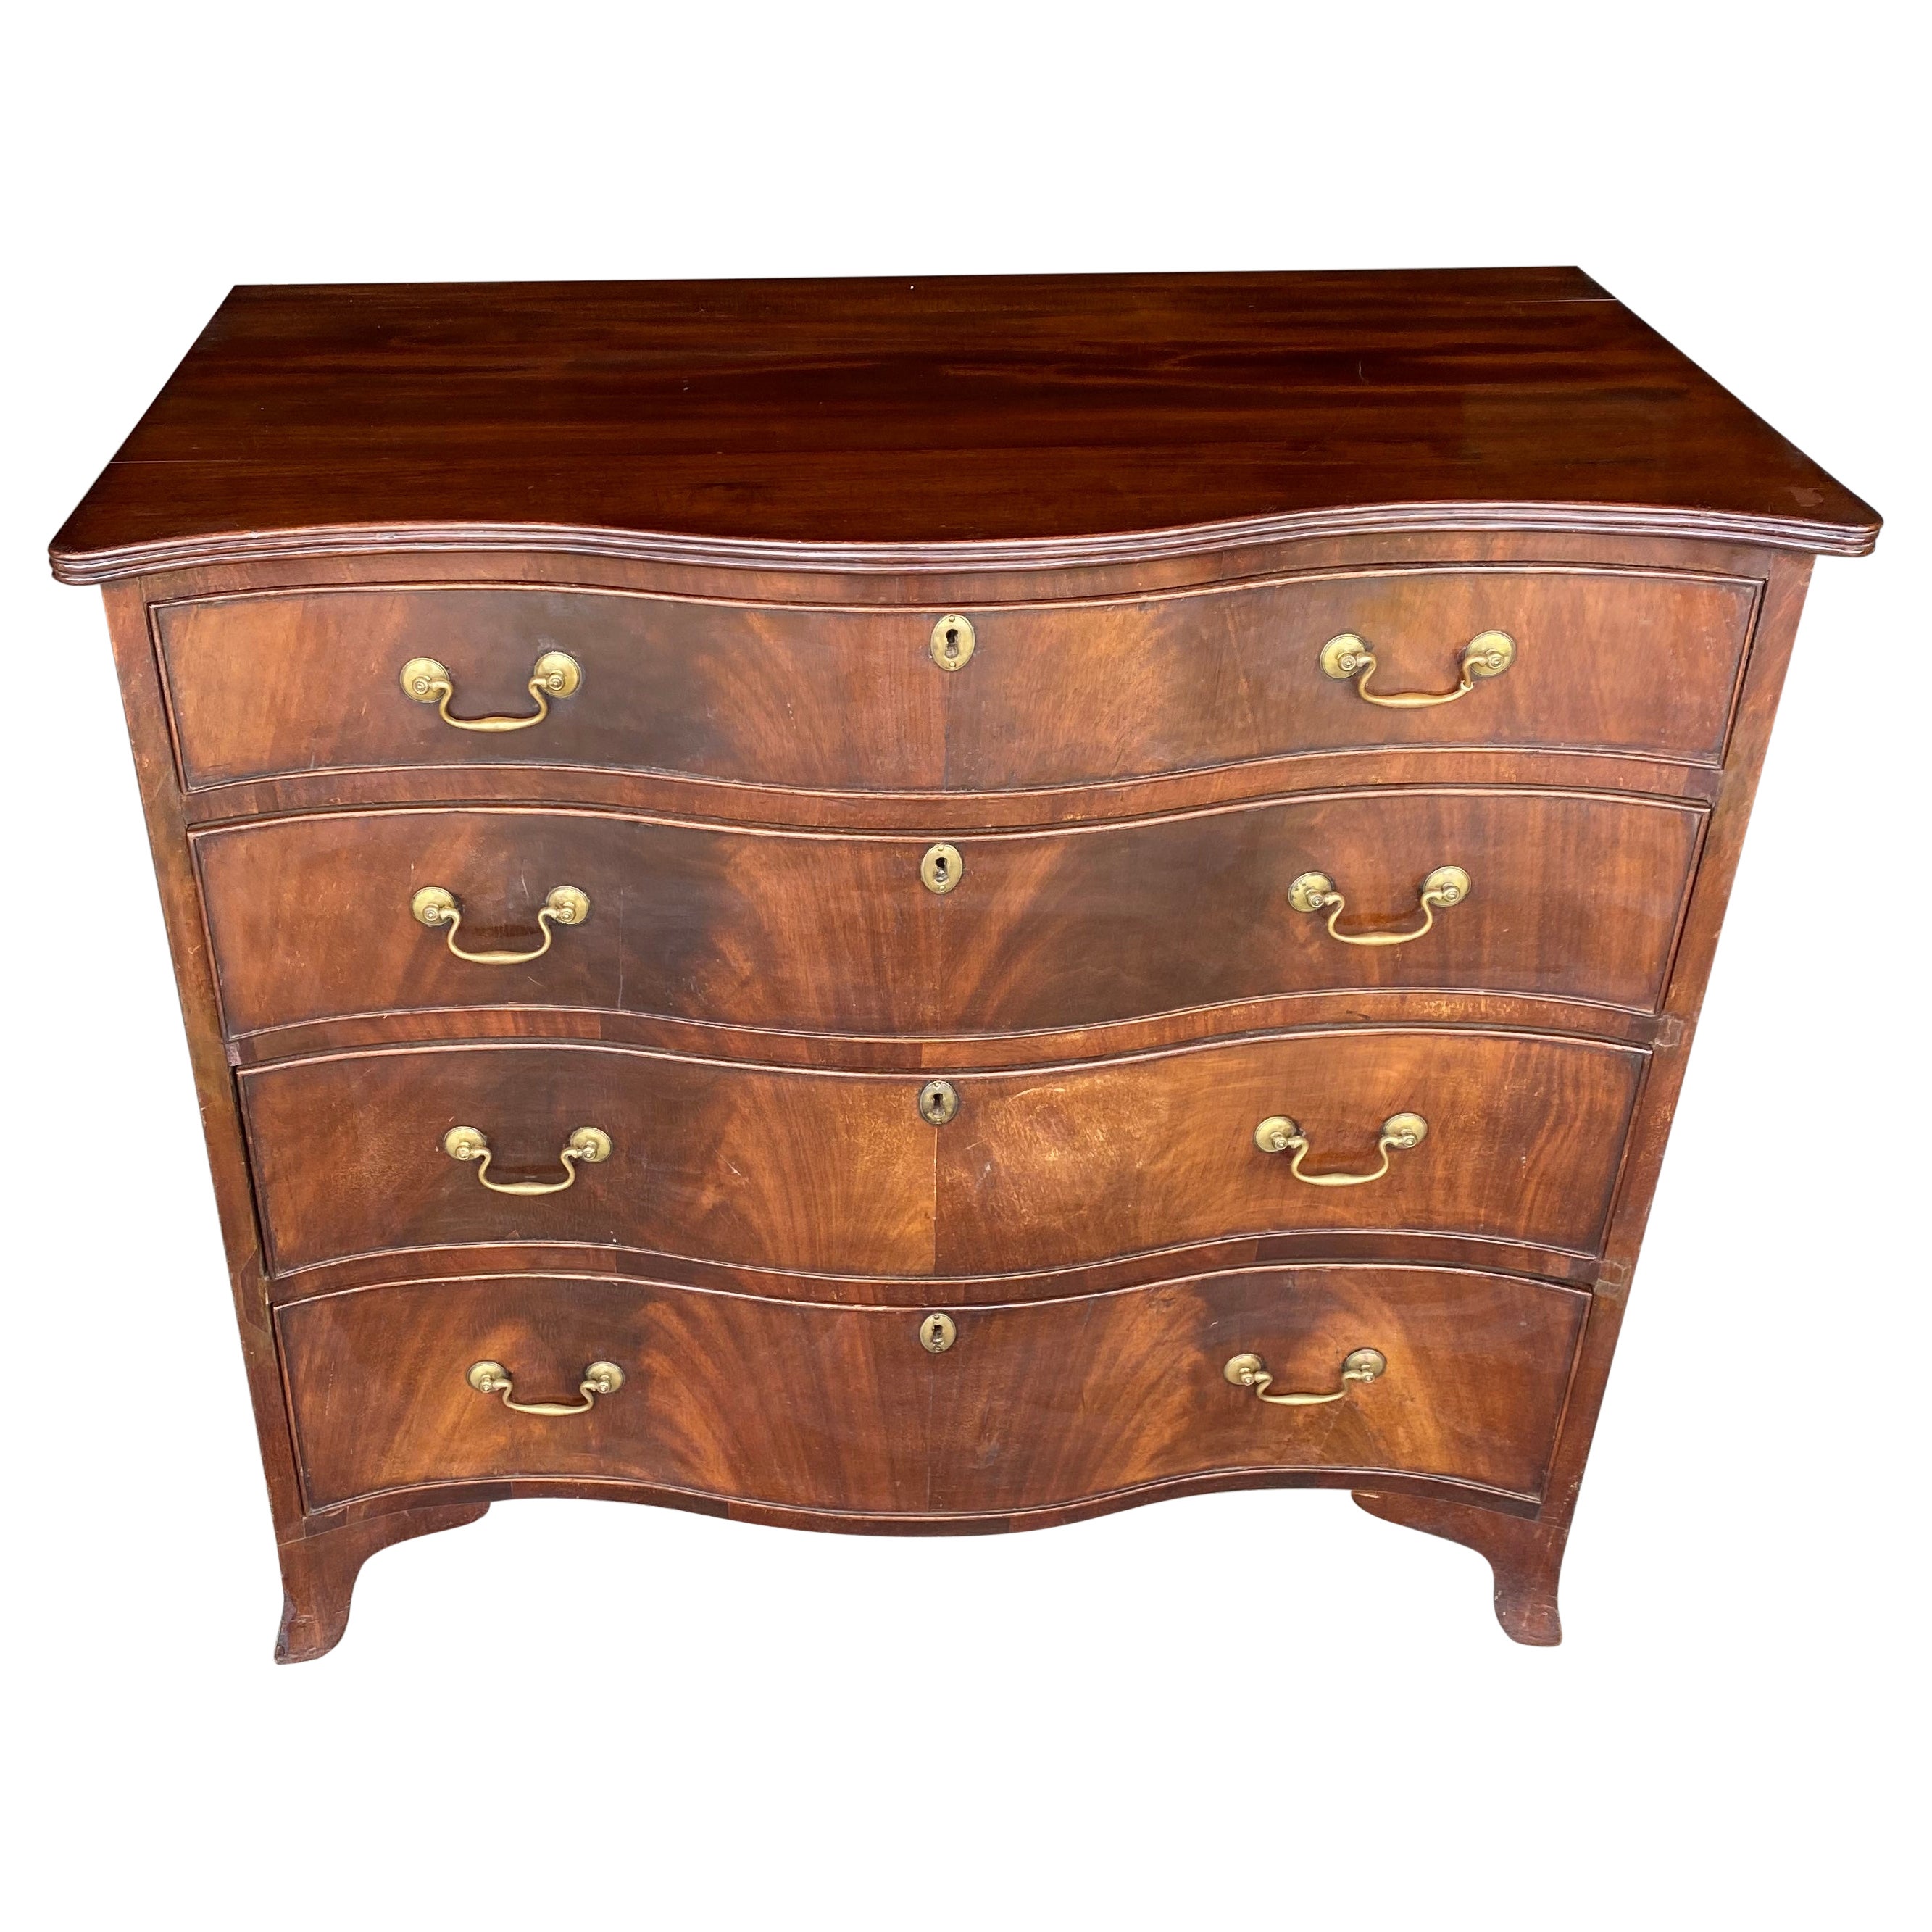 Early 19th century English Mahogany Serpetine Chest For Sale